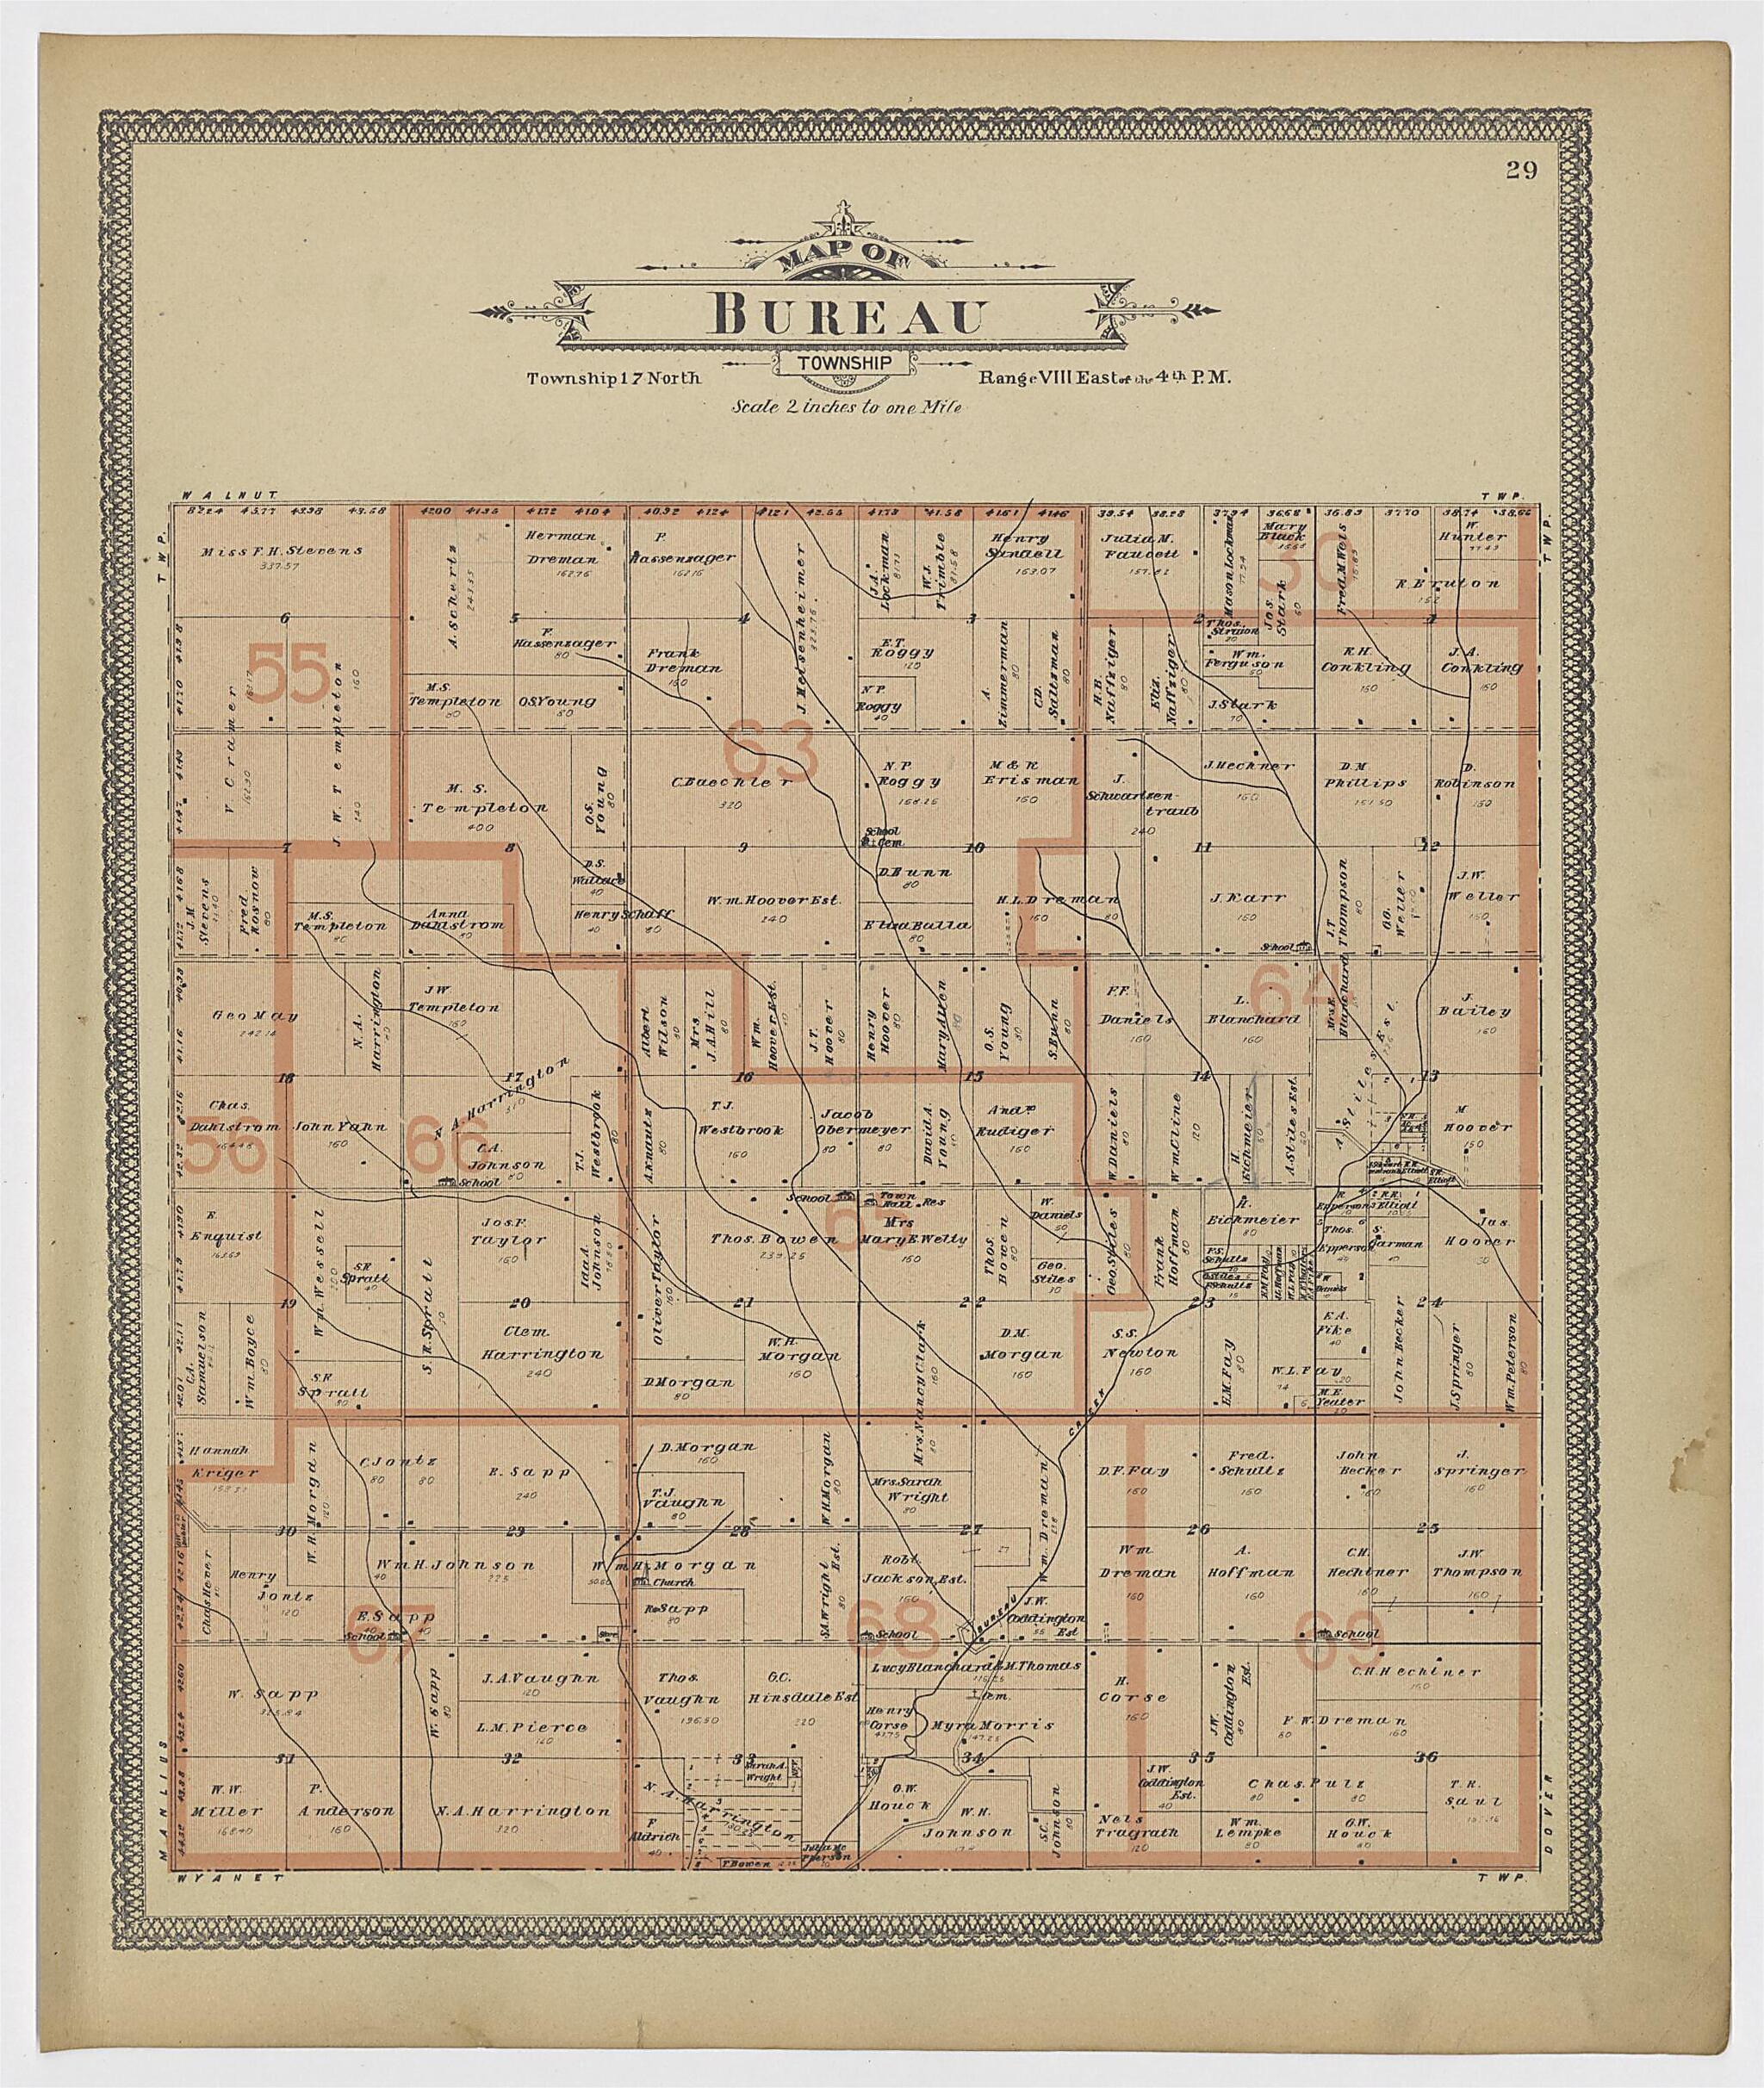 This old map of Image 16 of 20th Century Atlas of Bureau County, Illinois from Atlas of Bureau County, Illinois from 1905 was created by  Middle-West Publishing Co in 1905